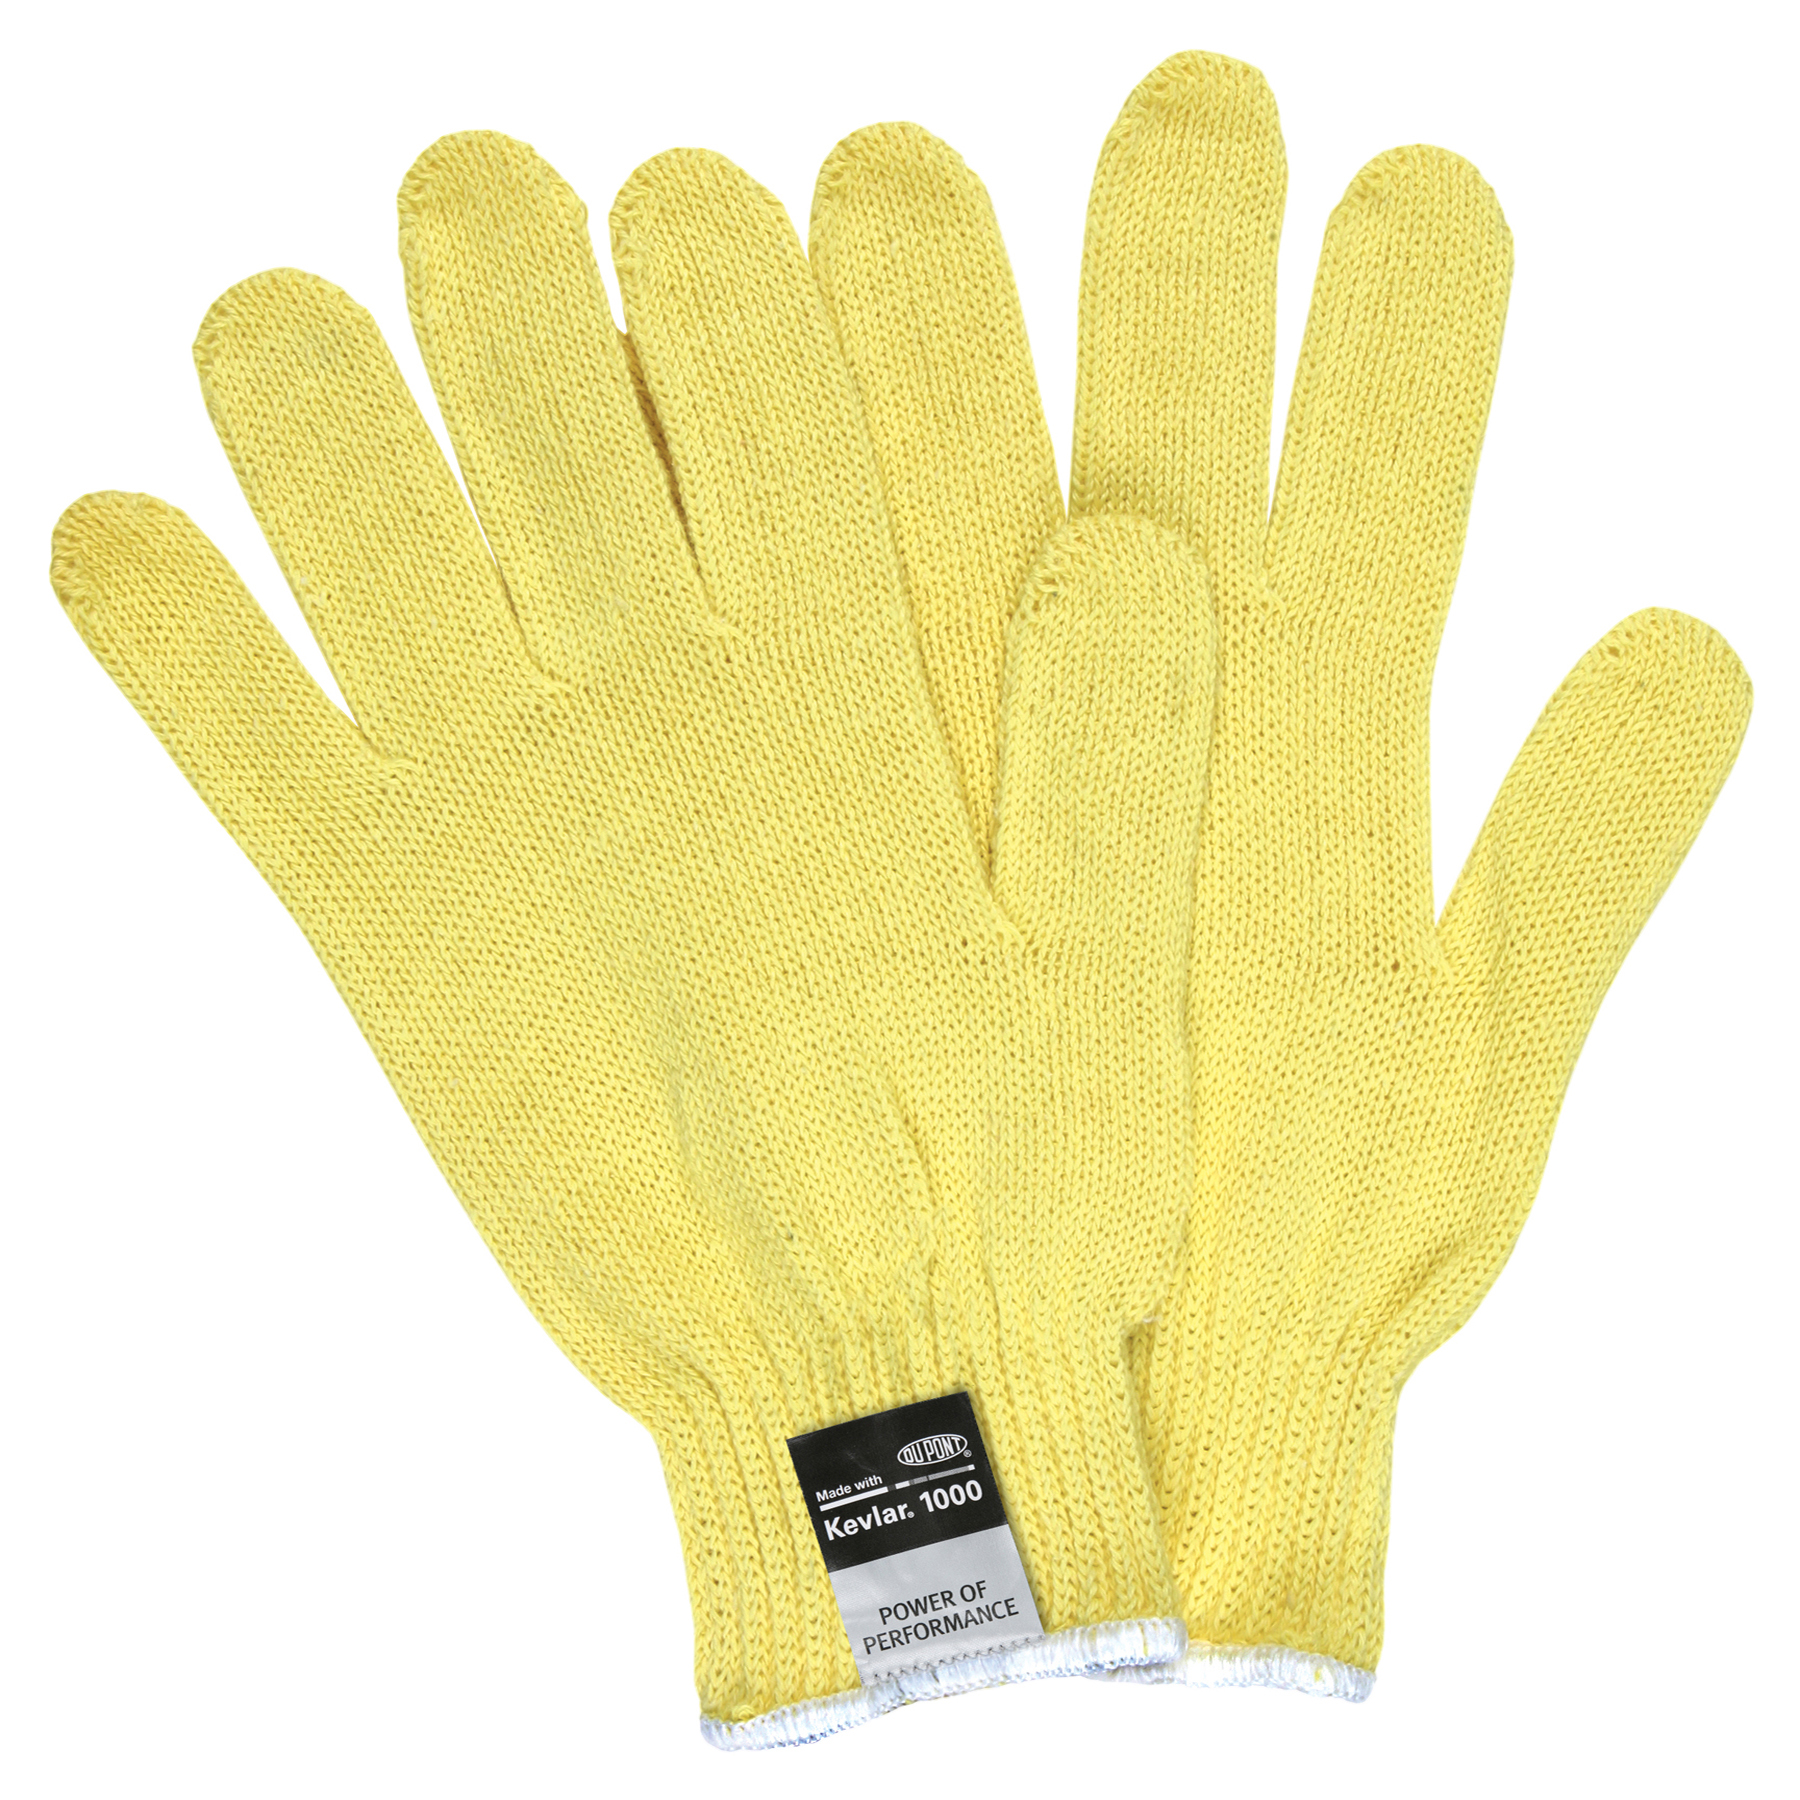 MCR 9370L Safety Cut Pro® Knit Gloves, Made With DuPont™ Kevlar® Fibers